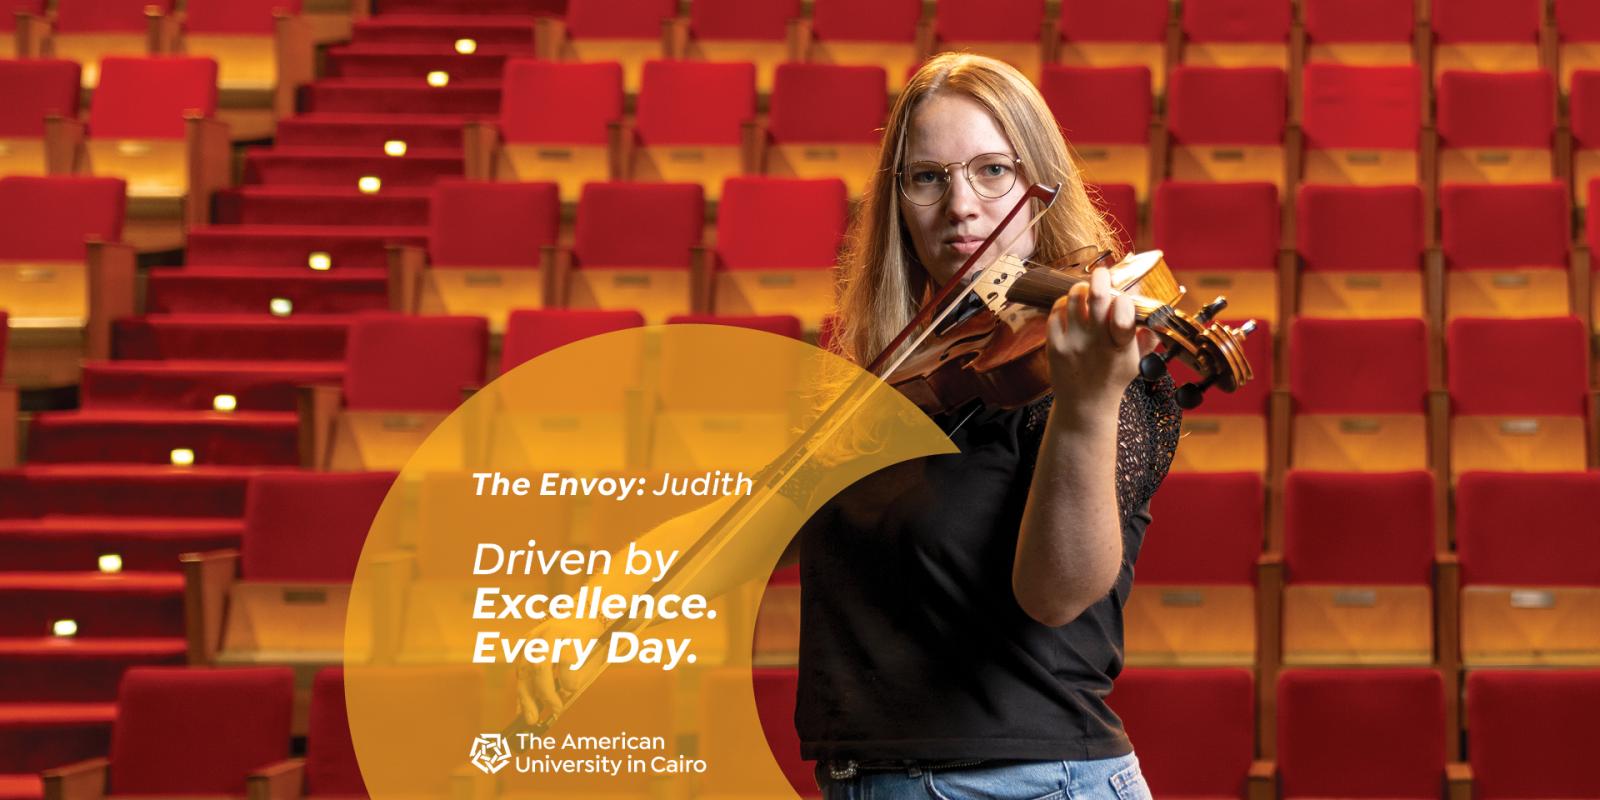 A female wearing glasses playing the violin in front of stage seats. Text reads "The Envoy: Judith. Driven by Excellence. Every Day. The American University in Cairo"